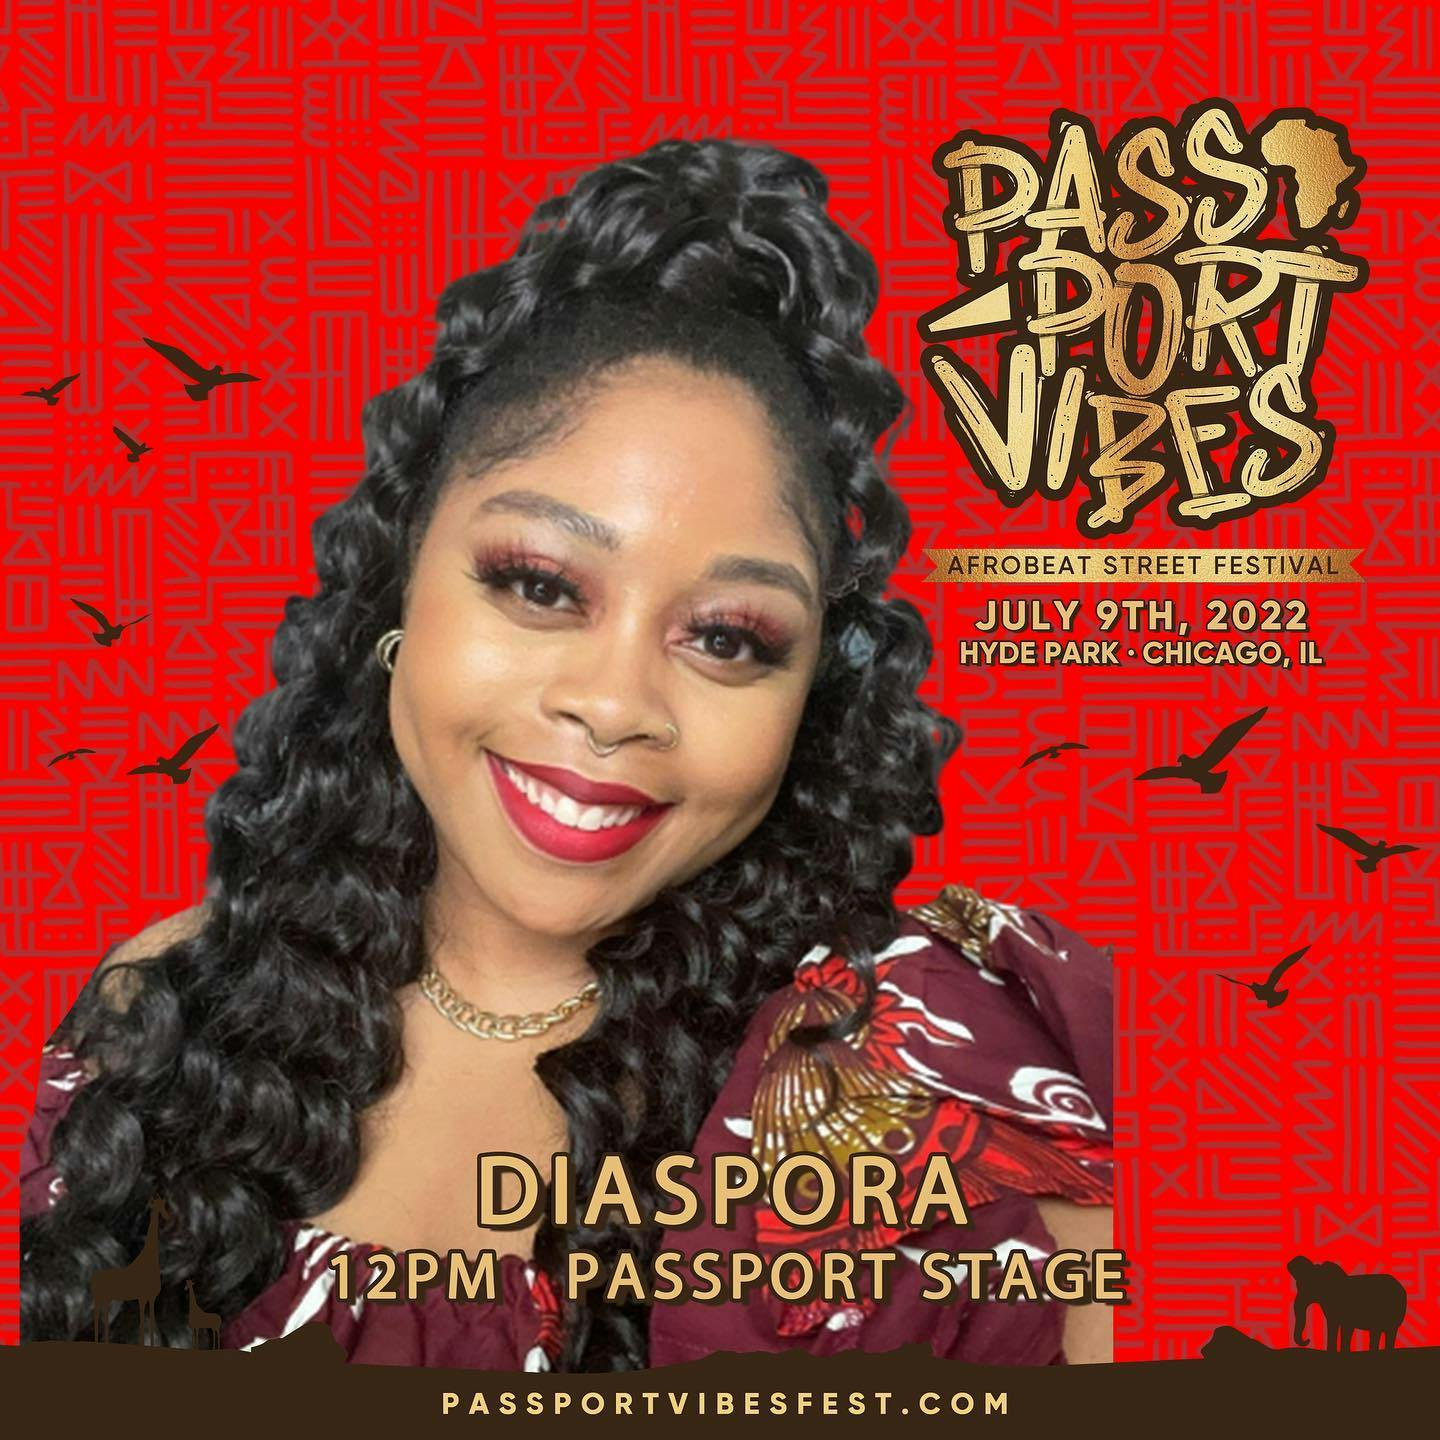 after my fantastic weekend at @festoflife, it’s only right I spend this Saturday spinning at @passportvibes_ afrobeats street festival.   
  
Showcasing music from DJs, food, dancers, African Board games—where the Mancala at?? Shoutout my old algebra teacher Mr. Wachuku—vendors, giveaways, and more.   
  
Meet me at the Passport Stage at noon ❤️  
. 
. 
. 
. 
. 
#DJDiaspora #DeejayDiaspora #ChicagoDJ #ChicagoDJs #WomenDJs #AfrobeatsDJ #DancehallDJ #womendj #afrobeats #soca #dancehall #africandiaspora #worldmusic #reggae #djmix #soundcloud #amapiano #passportvibes